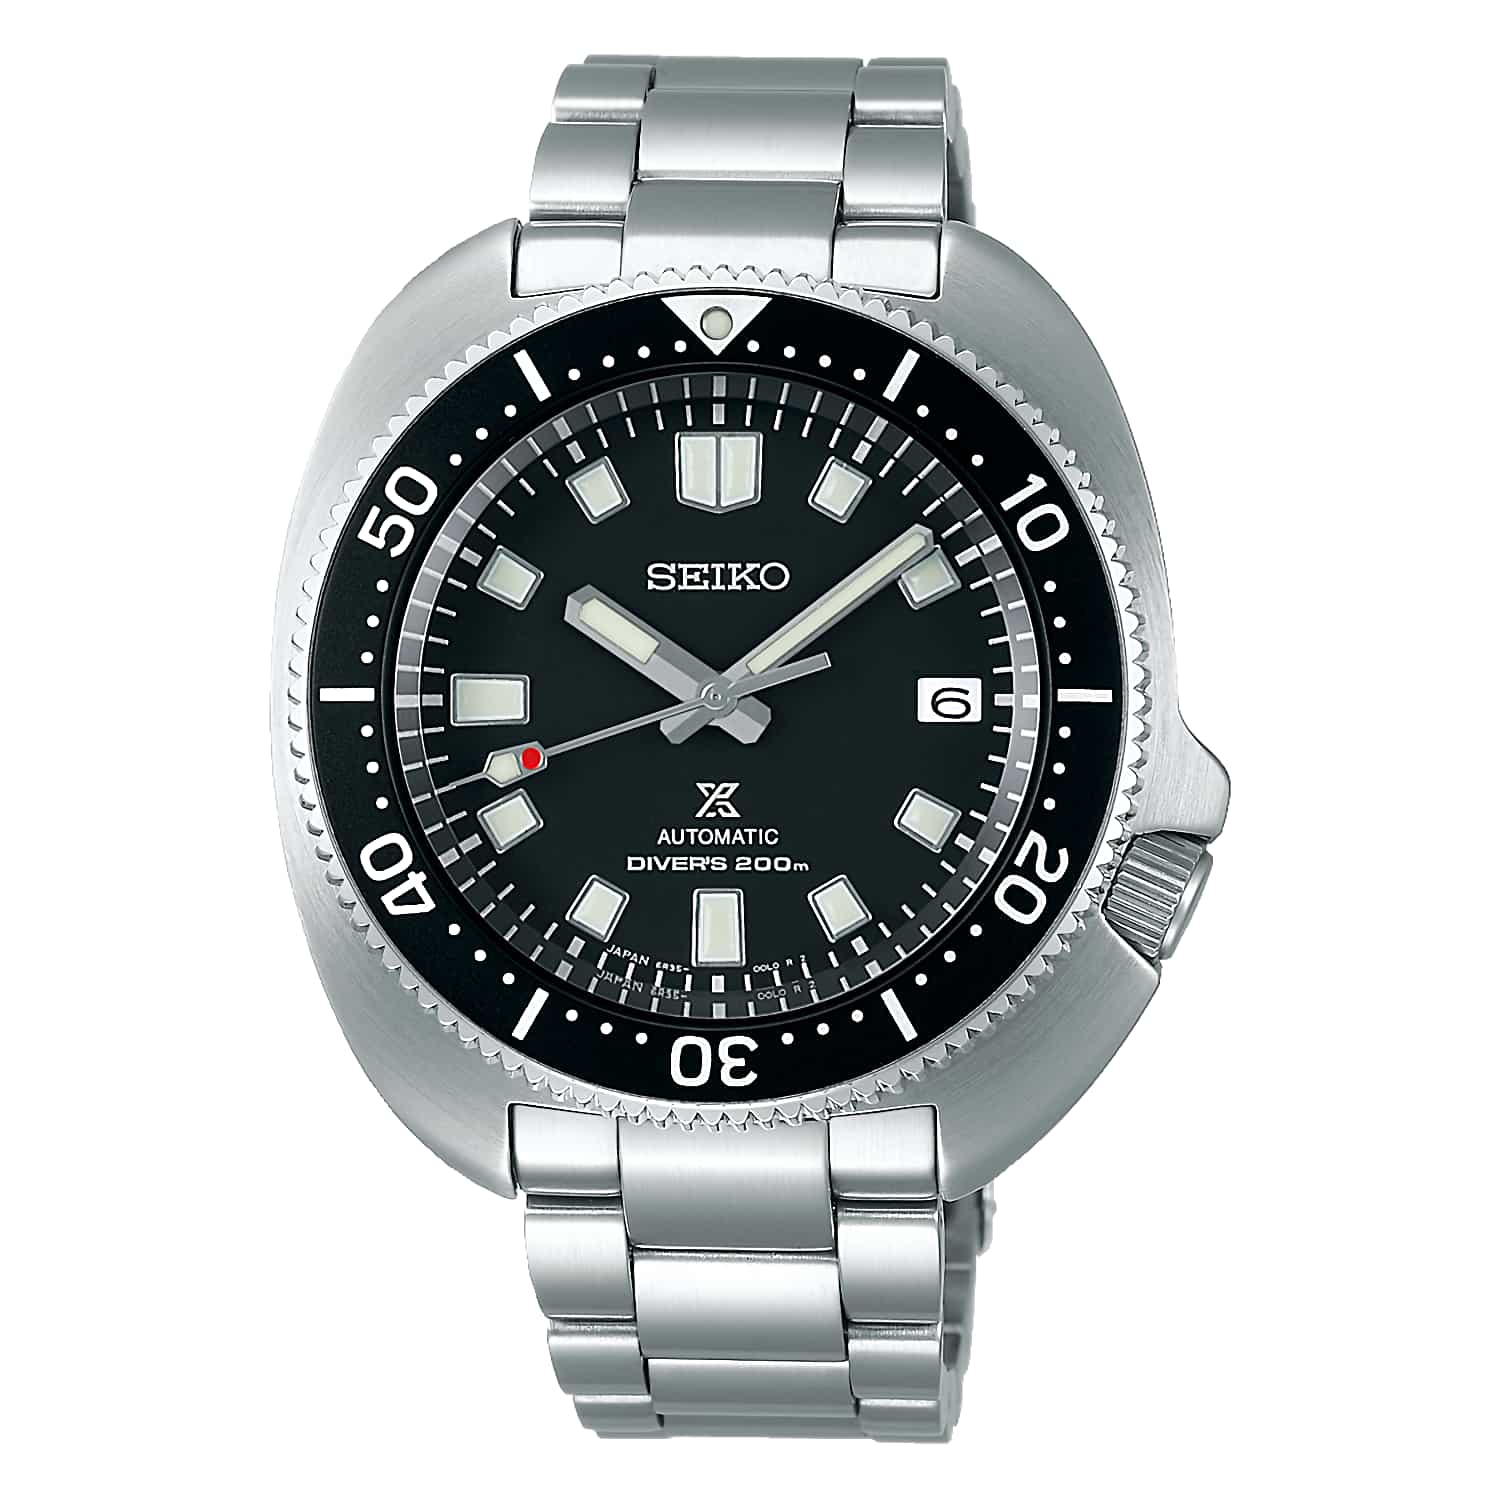 SPB151J1 SEIKO Prospex Automatic Divers Watch. Seiko Prospex challenges every limit, with a collection of timepieces for sports lovers and adventure seekers whether in the water, in the sky or on land. Since launching Japan’s first diver’s watch in 1965, 